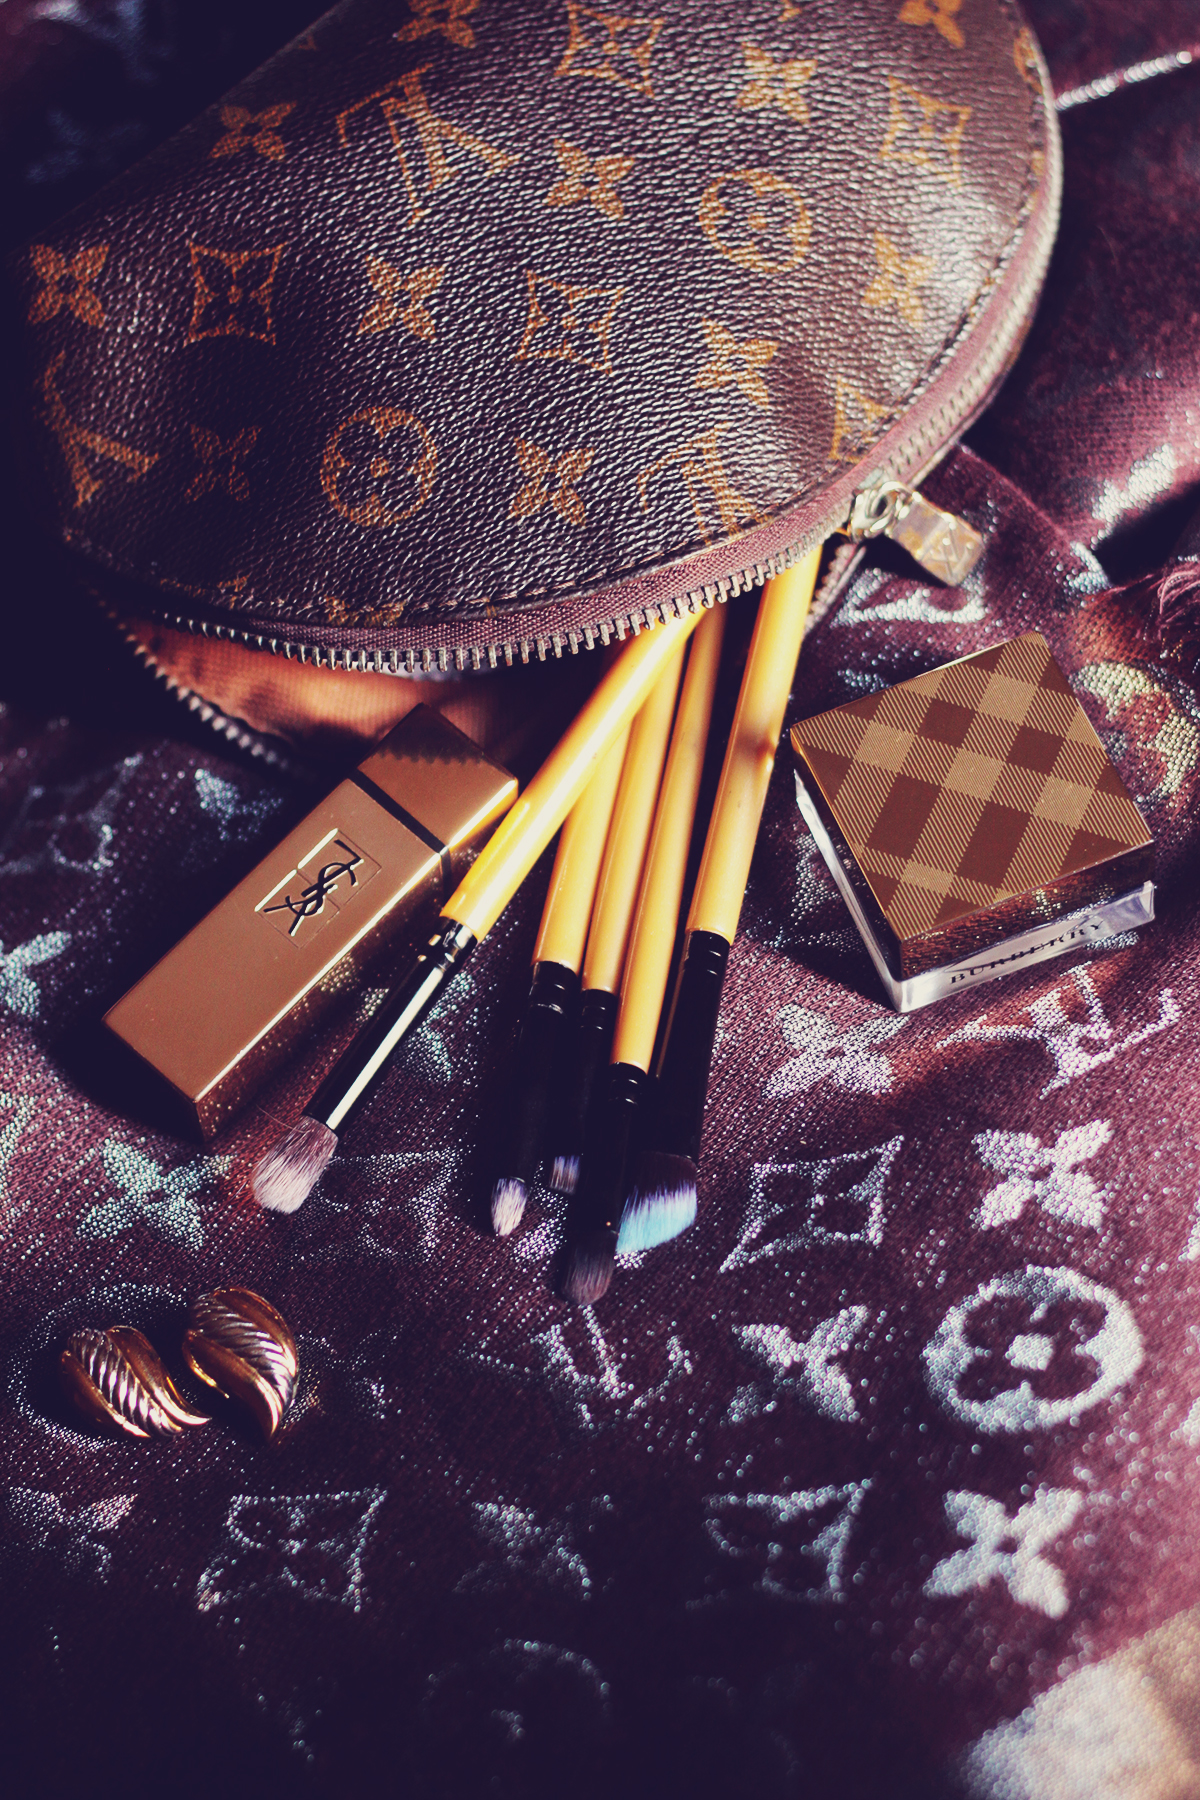 louis vuitton monogram brown and silver scarf, louis vuitton make-up pouch, YSL lipstick, burberry highlighter, make-up brushes, burberry vintage stud earrings